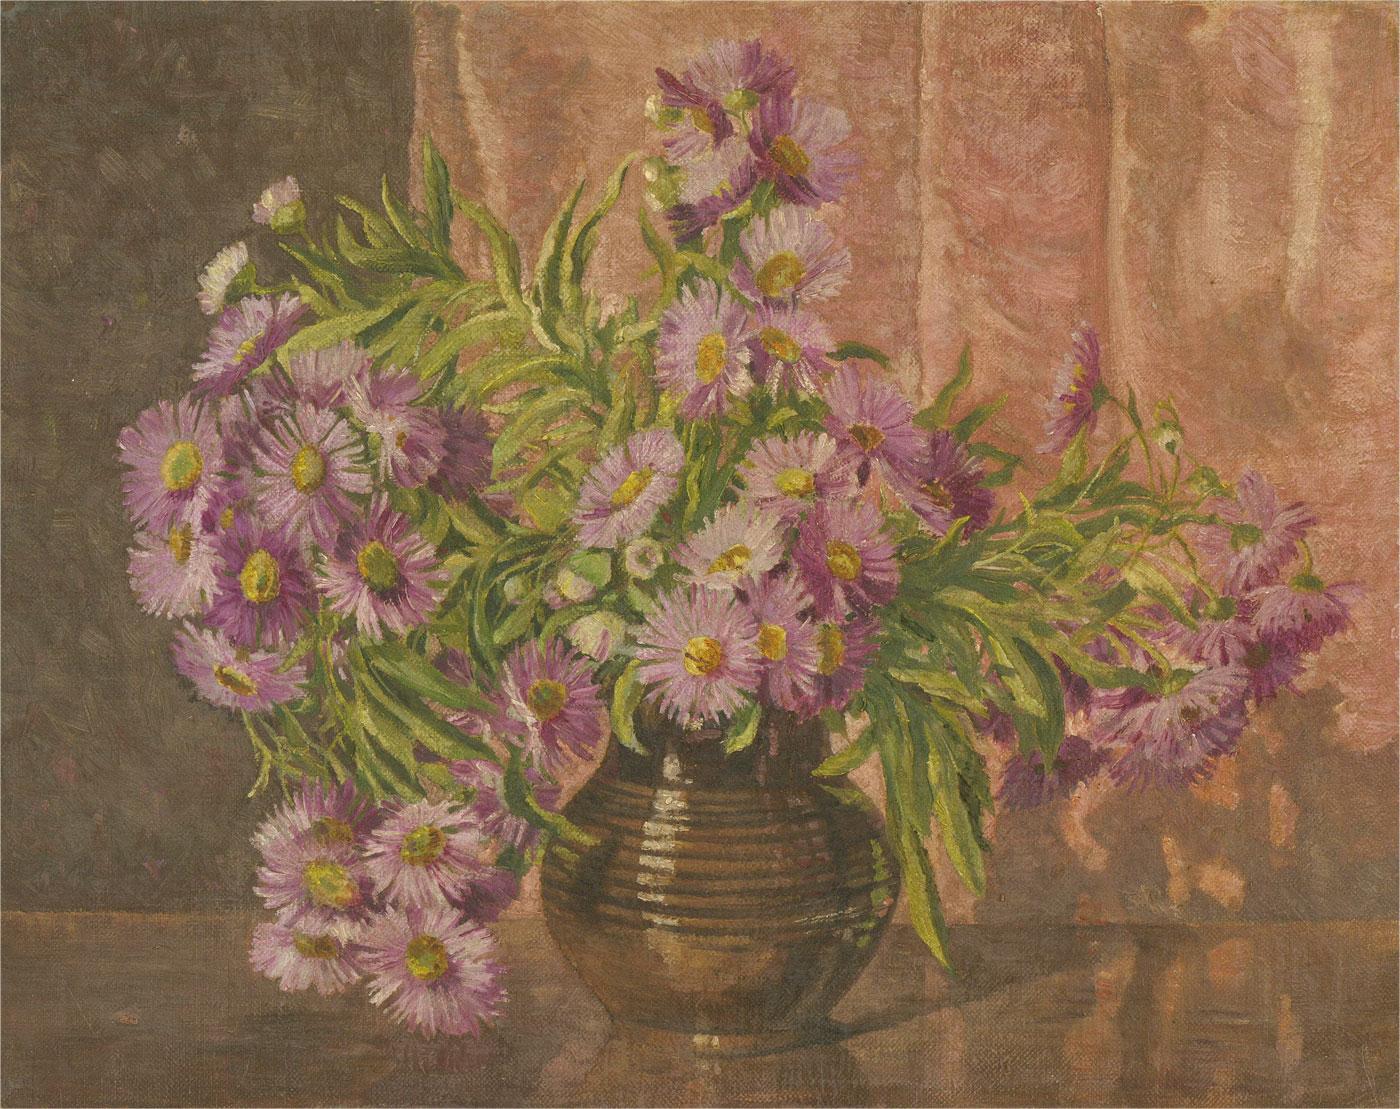 A fine mid Century floral still life showing an earthenware vase filled with delicate purple aster. The painting is unsigned and presented in a simple mid Century frame. There is a sticker at the reverse indicating that this was displayed at Luton